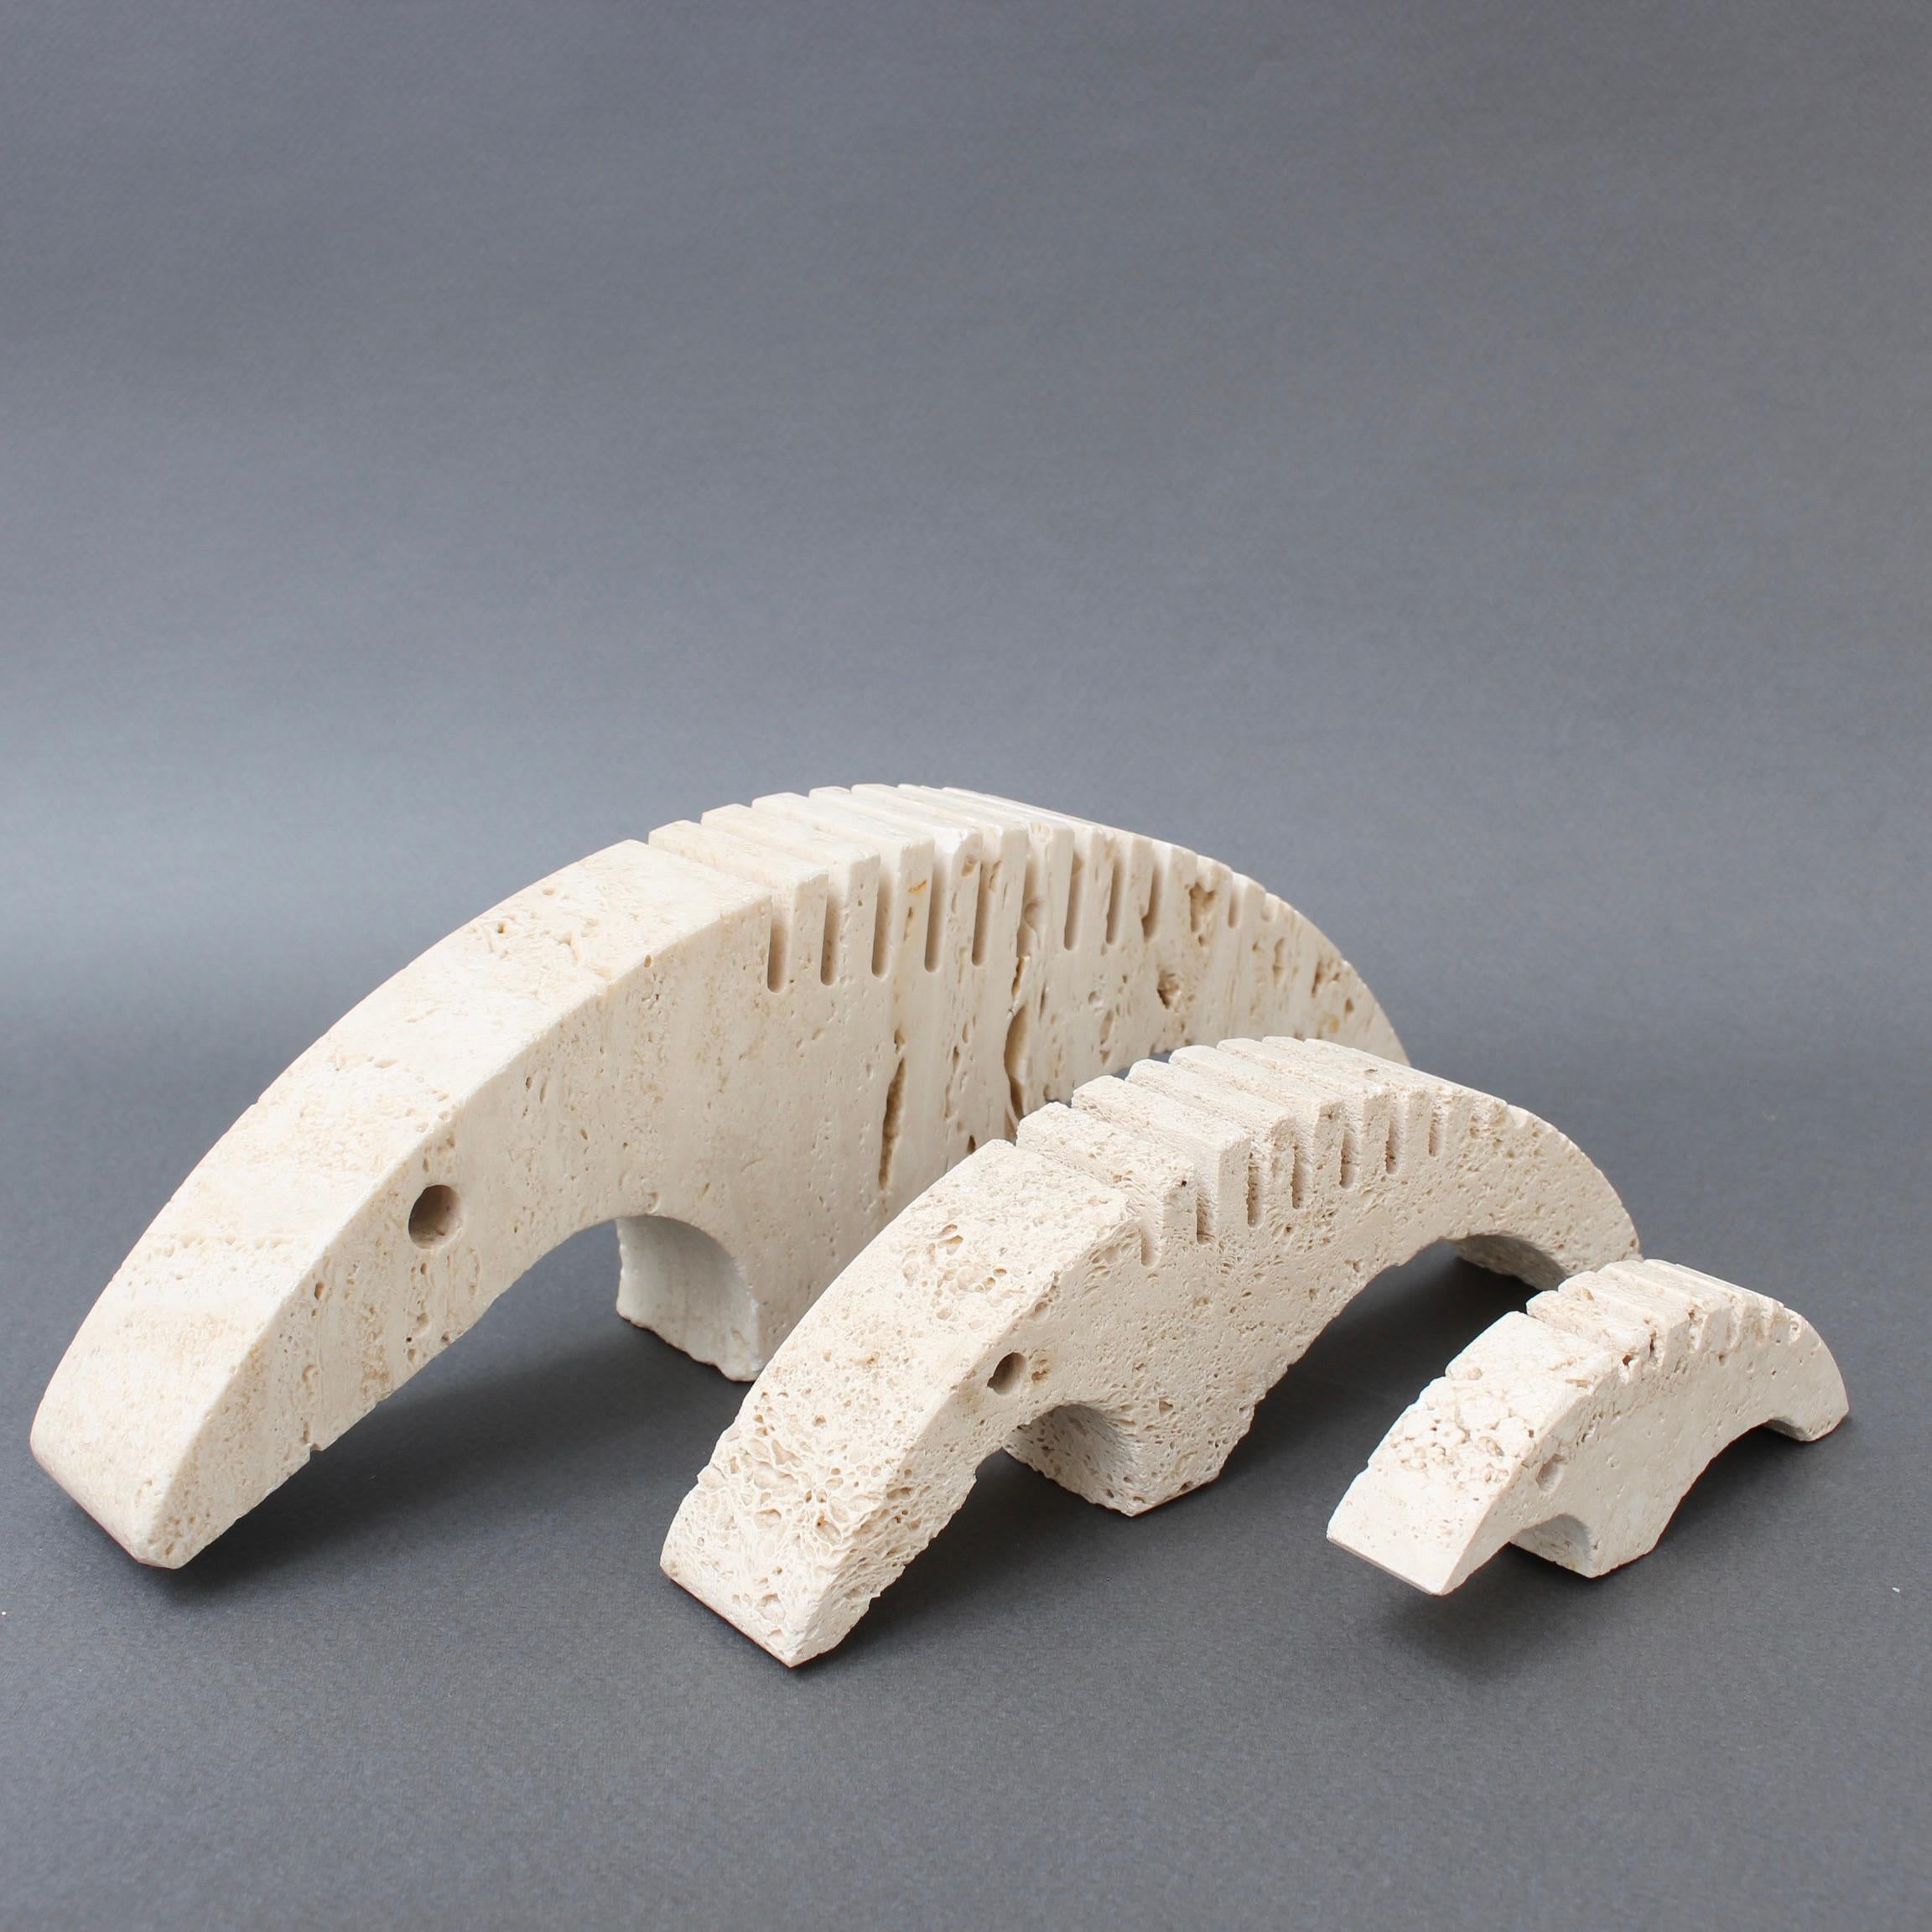 Stylized travertine anteater card or letter holder set by Mannelli brothers (circa 1970s). Designed by Italians, Fratelli Mannelli, these charming pieces have loads of character and will delight collectors and those who love beautiful objects. They